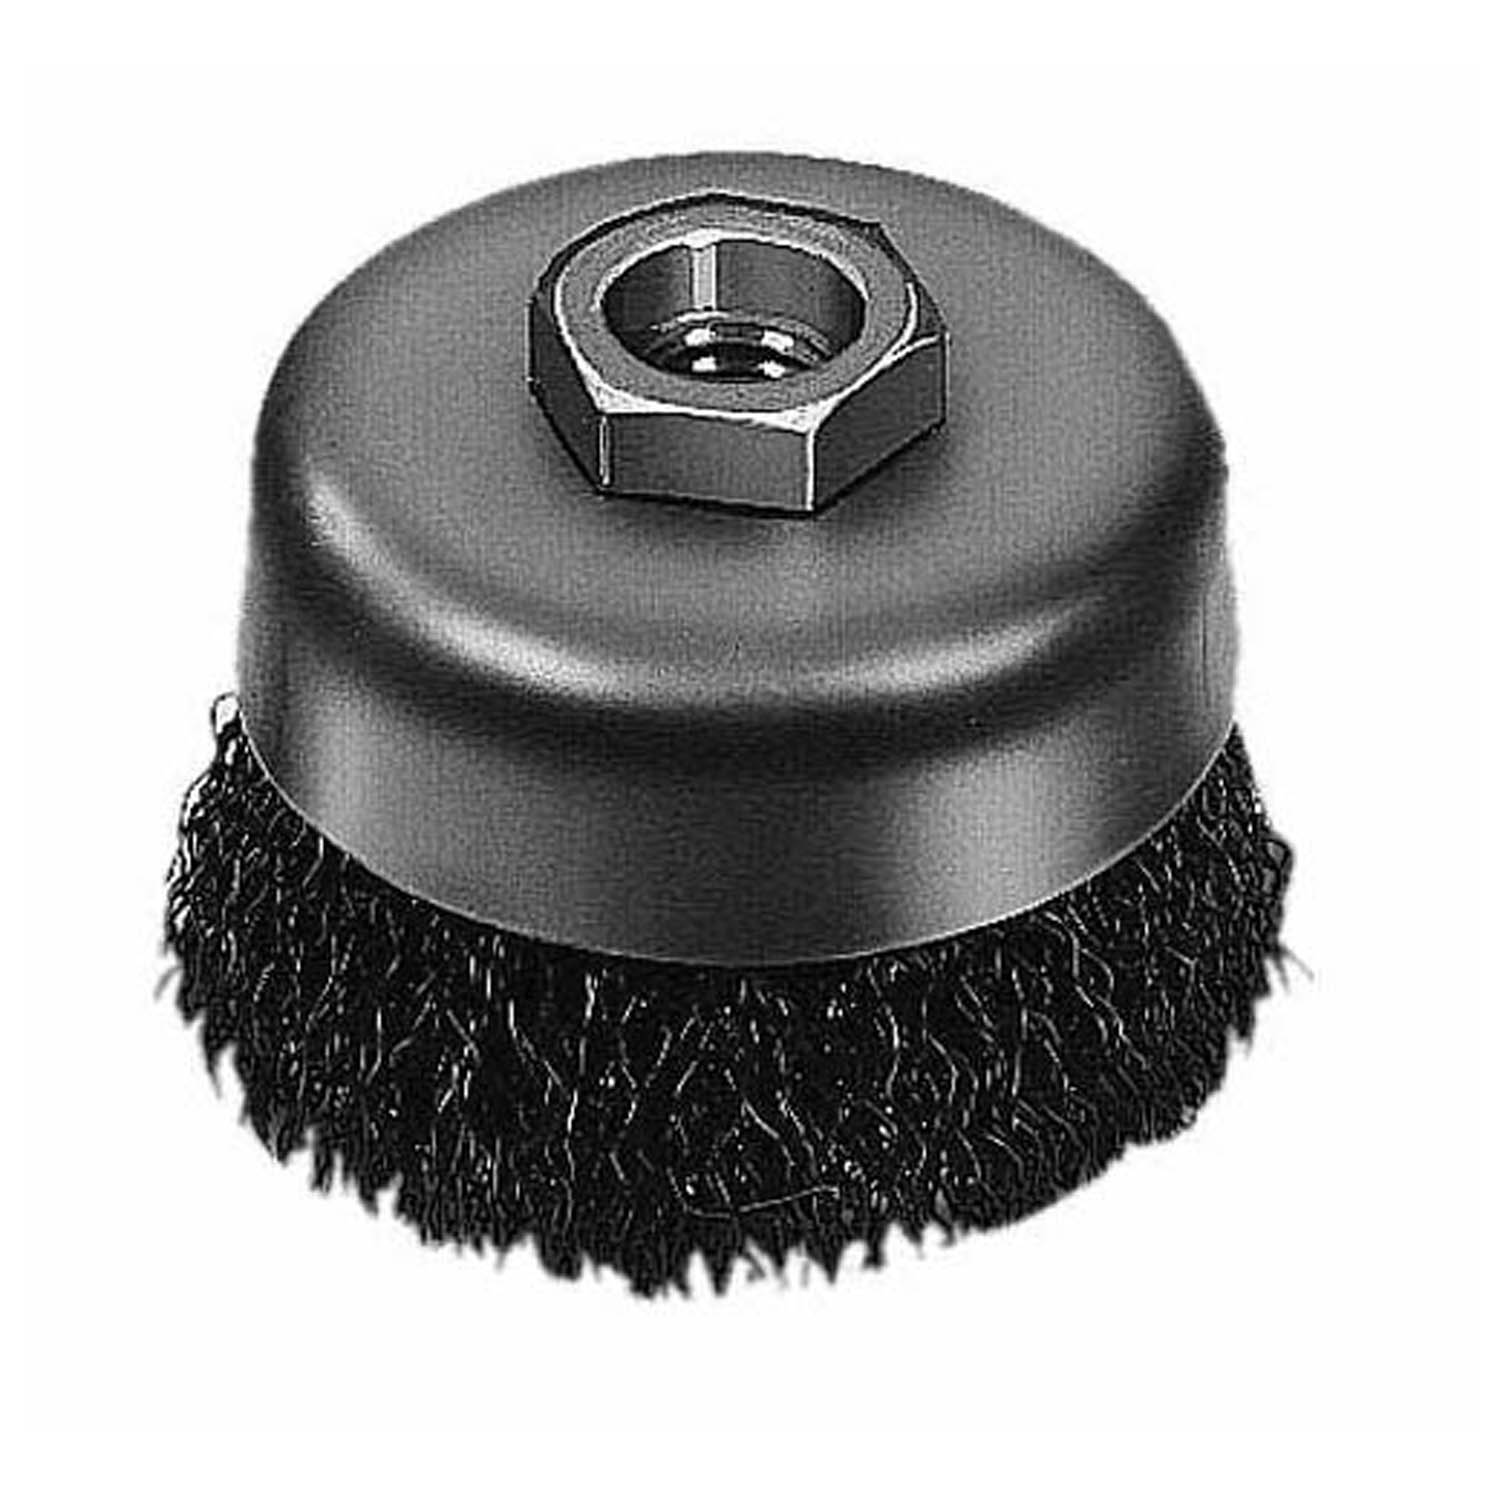 6 in. Carbon Steel Crimped Wire Cup Brush